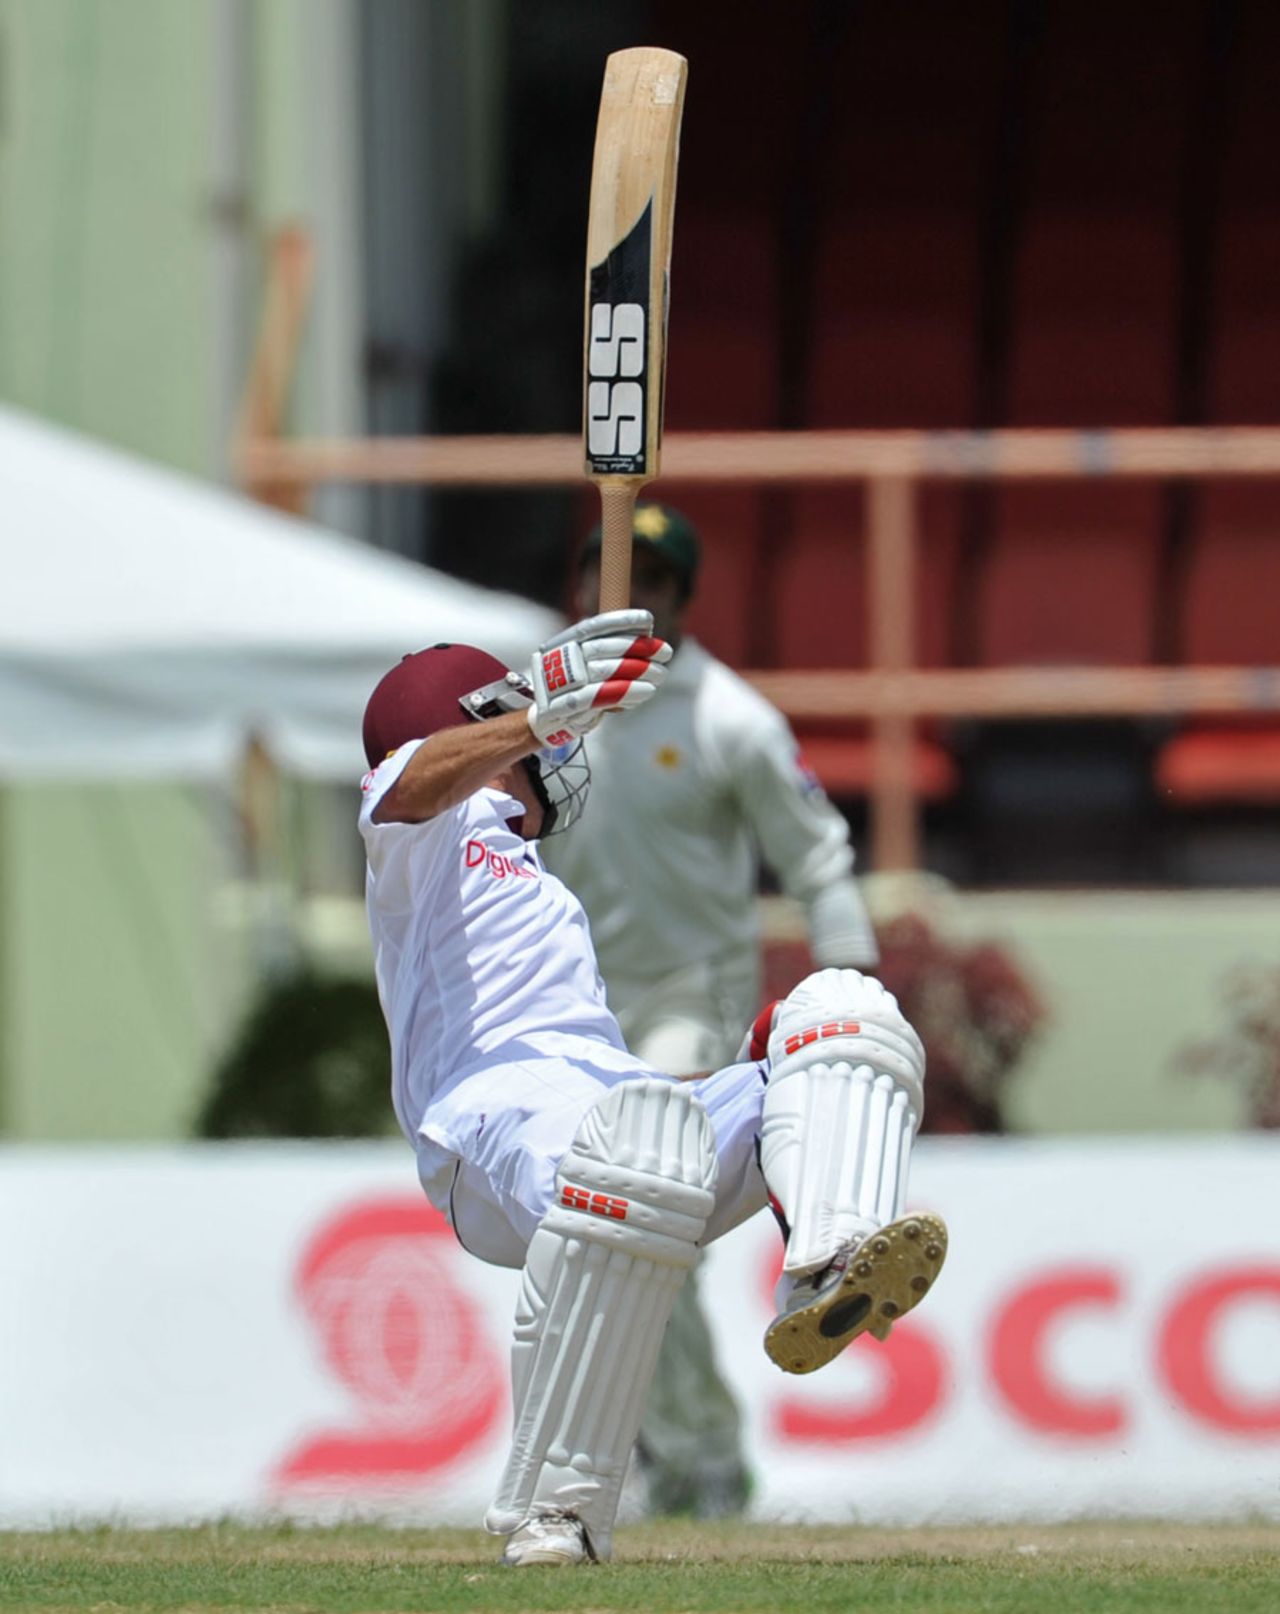 Brendan Nash falls over while trying to turn, West Indies v Pakistan, 1st Test, Providence, 3rd day, May 14, 2011